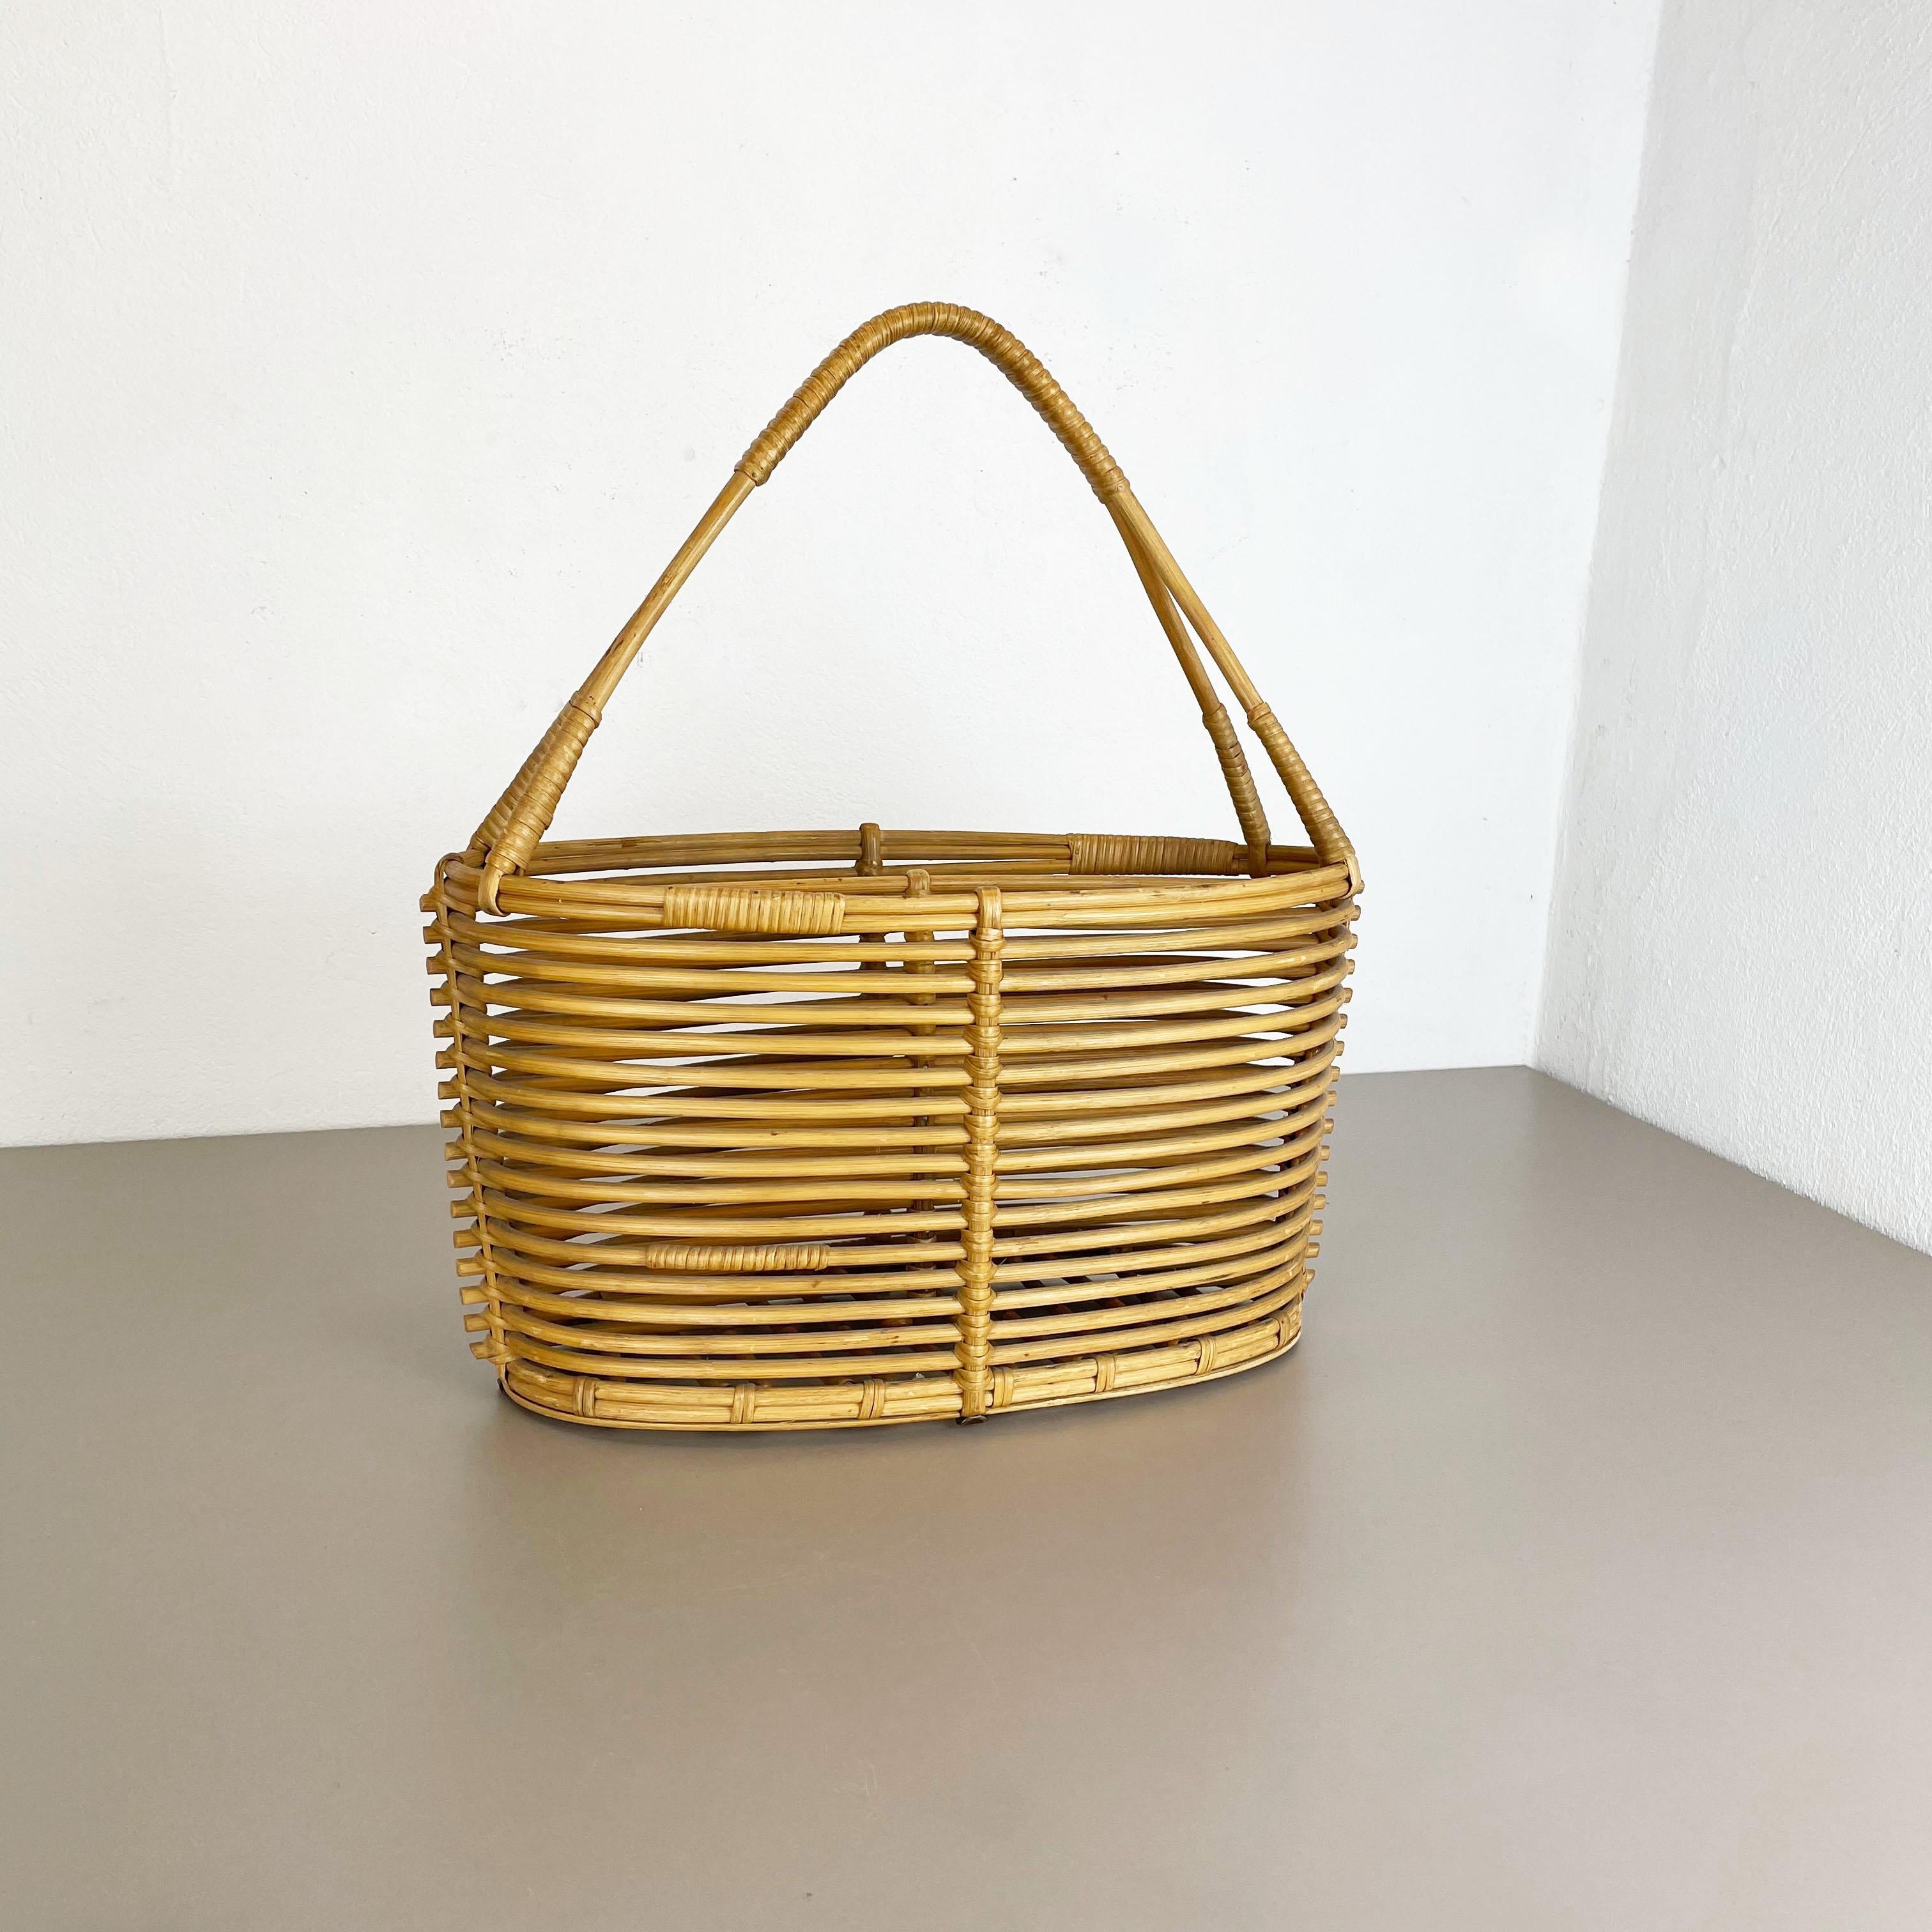 Article: magazine holder stand element

Origin: France

Age: 1970s

This original vintage Bauhaus style magazine holder stand was produced in the 1970s in France. It is made of natural rattan in a oval formed shape and at the top a handle